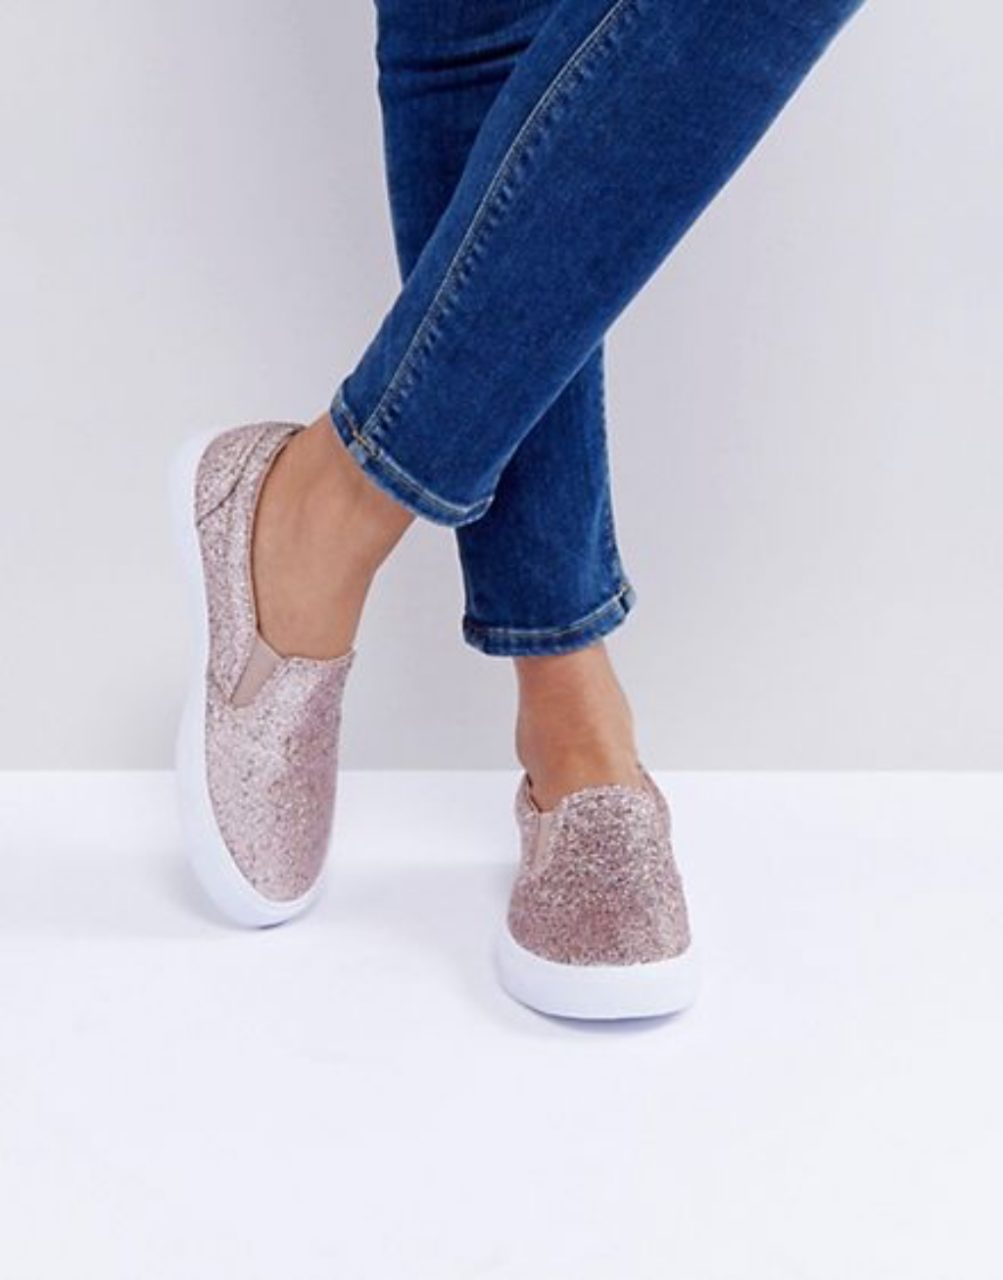 6 Stylish ASOS Wedding Shoes That Won't Hurt Your Feet And Bank ...